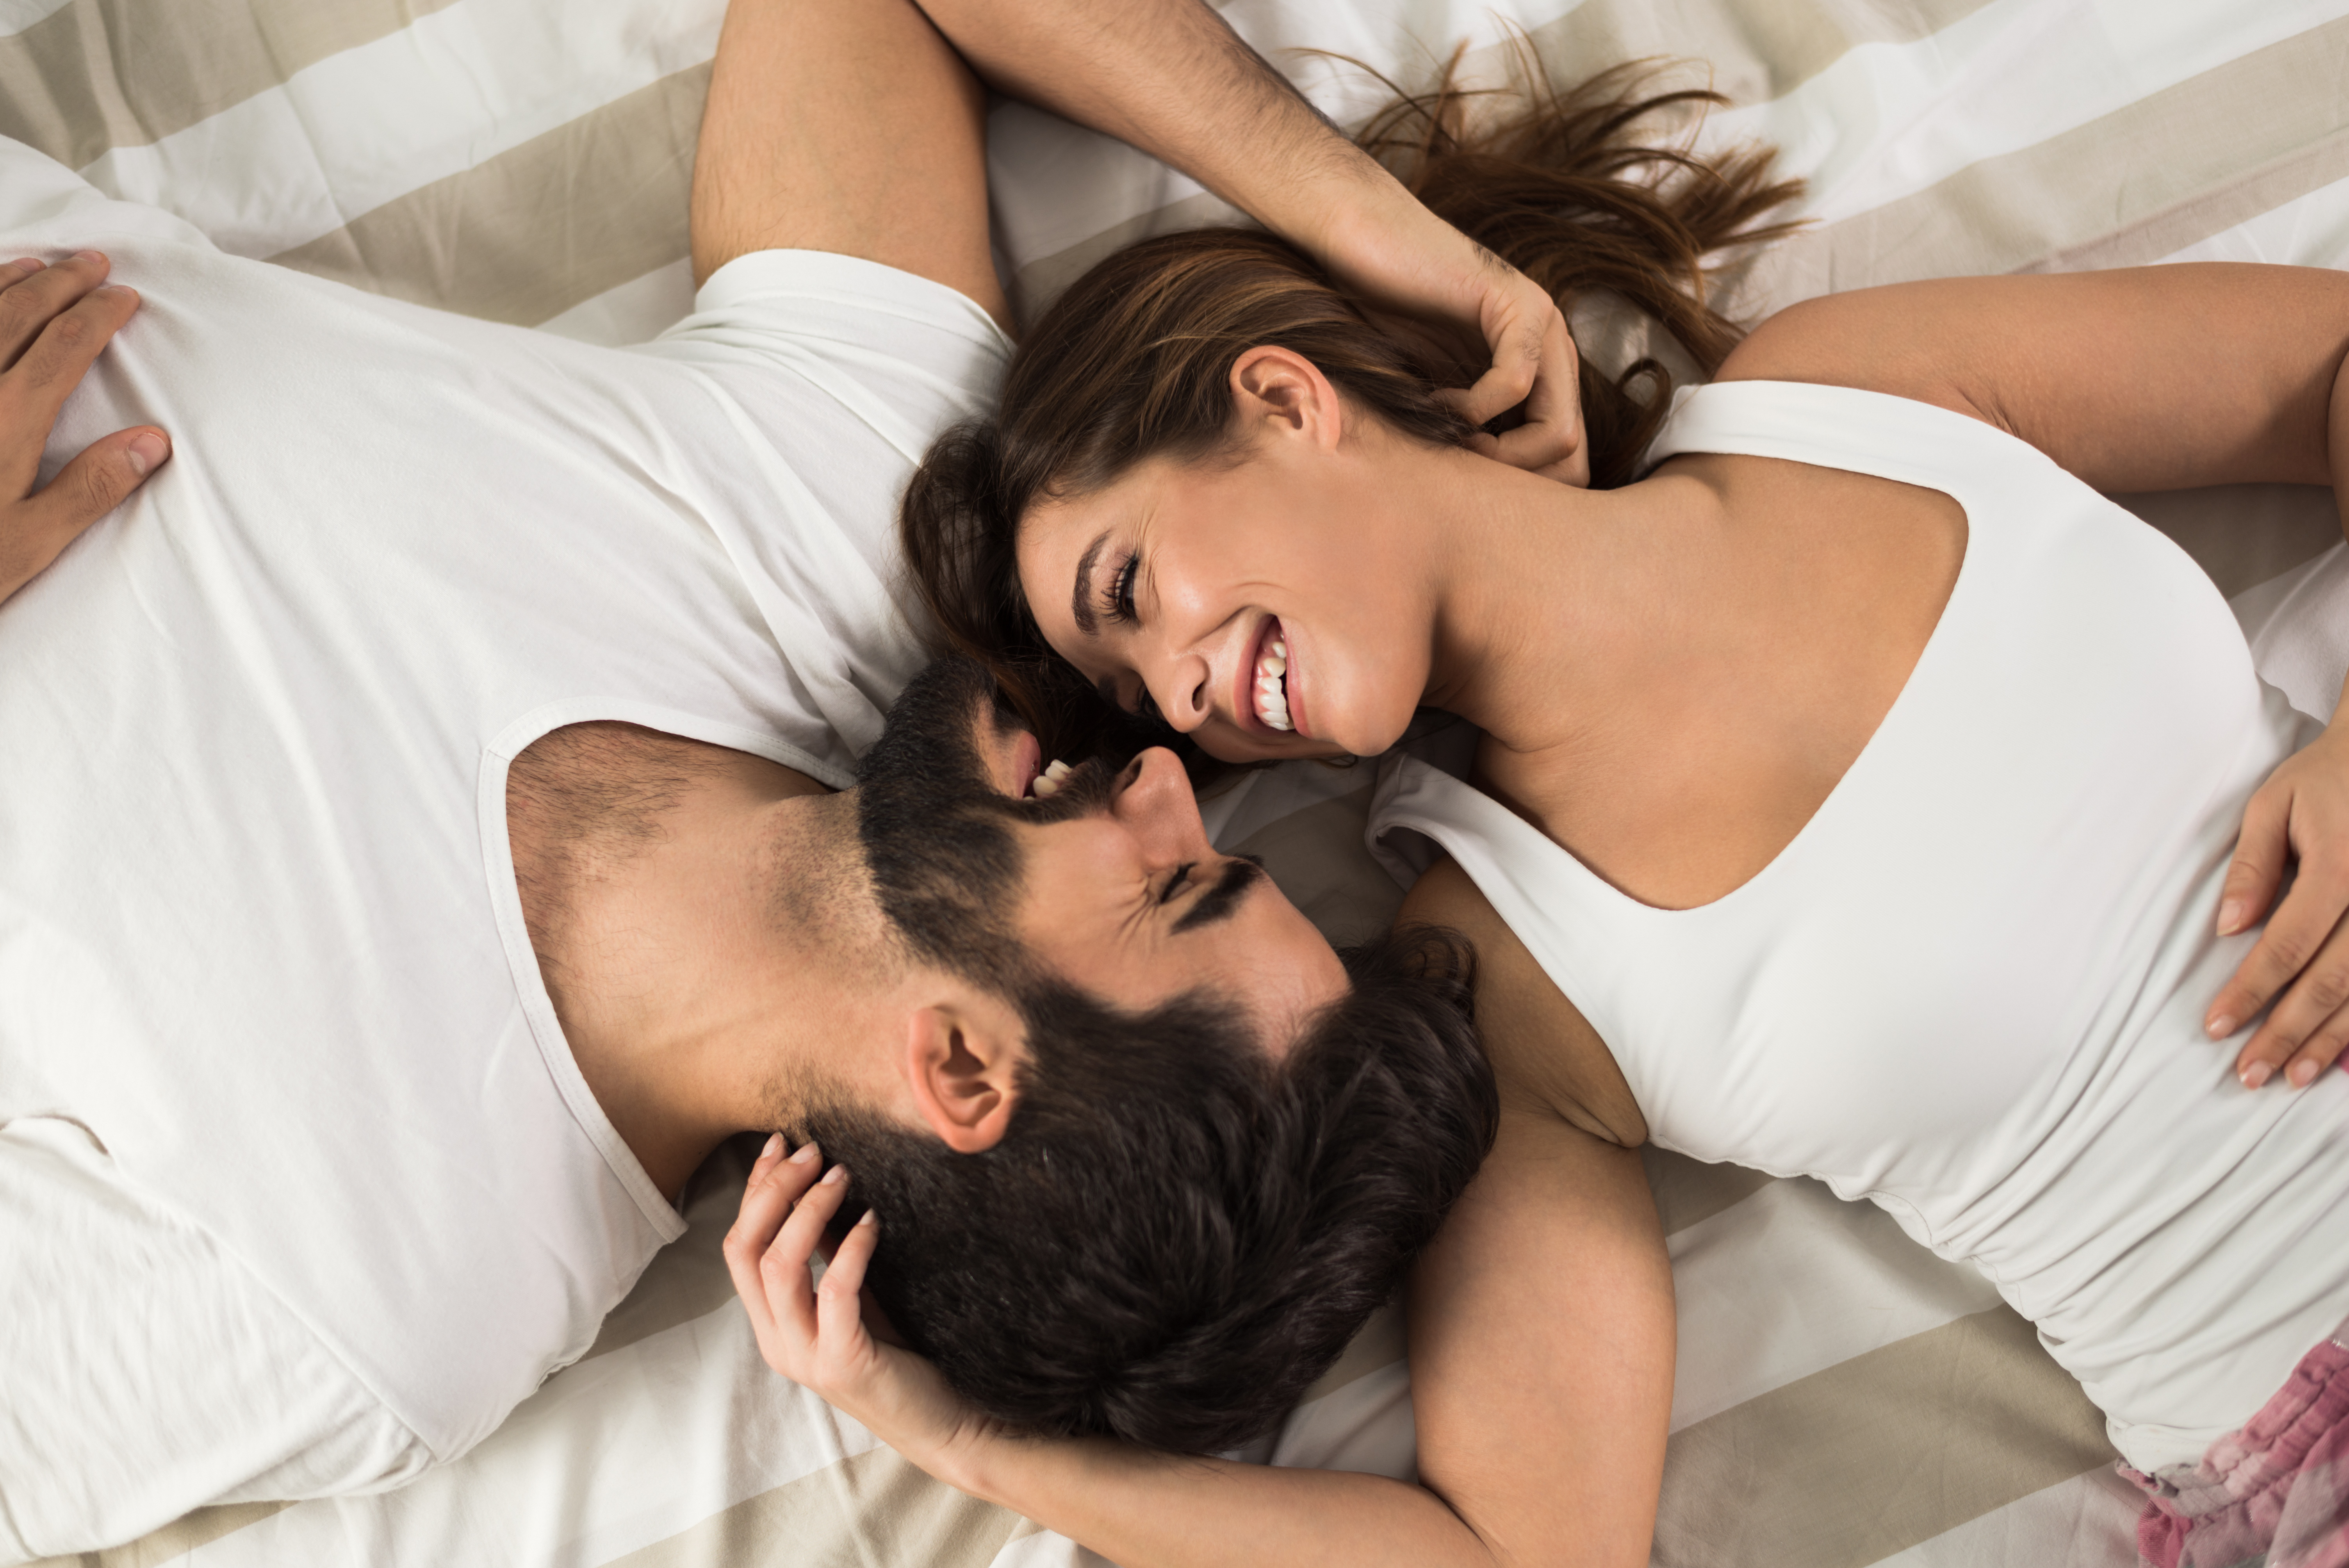 A happy couple laying in bed while smiling at each other | Source: Shutterstock